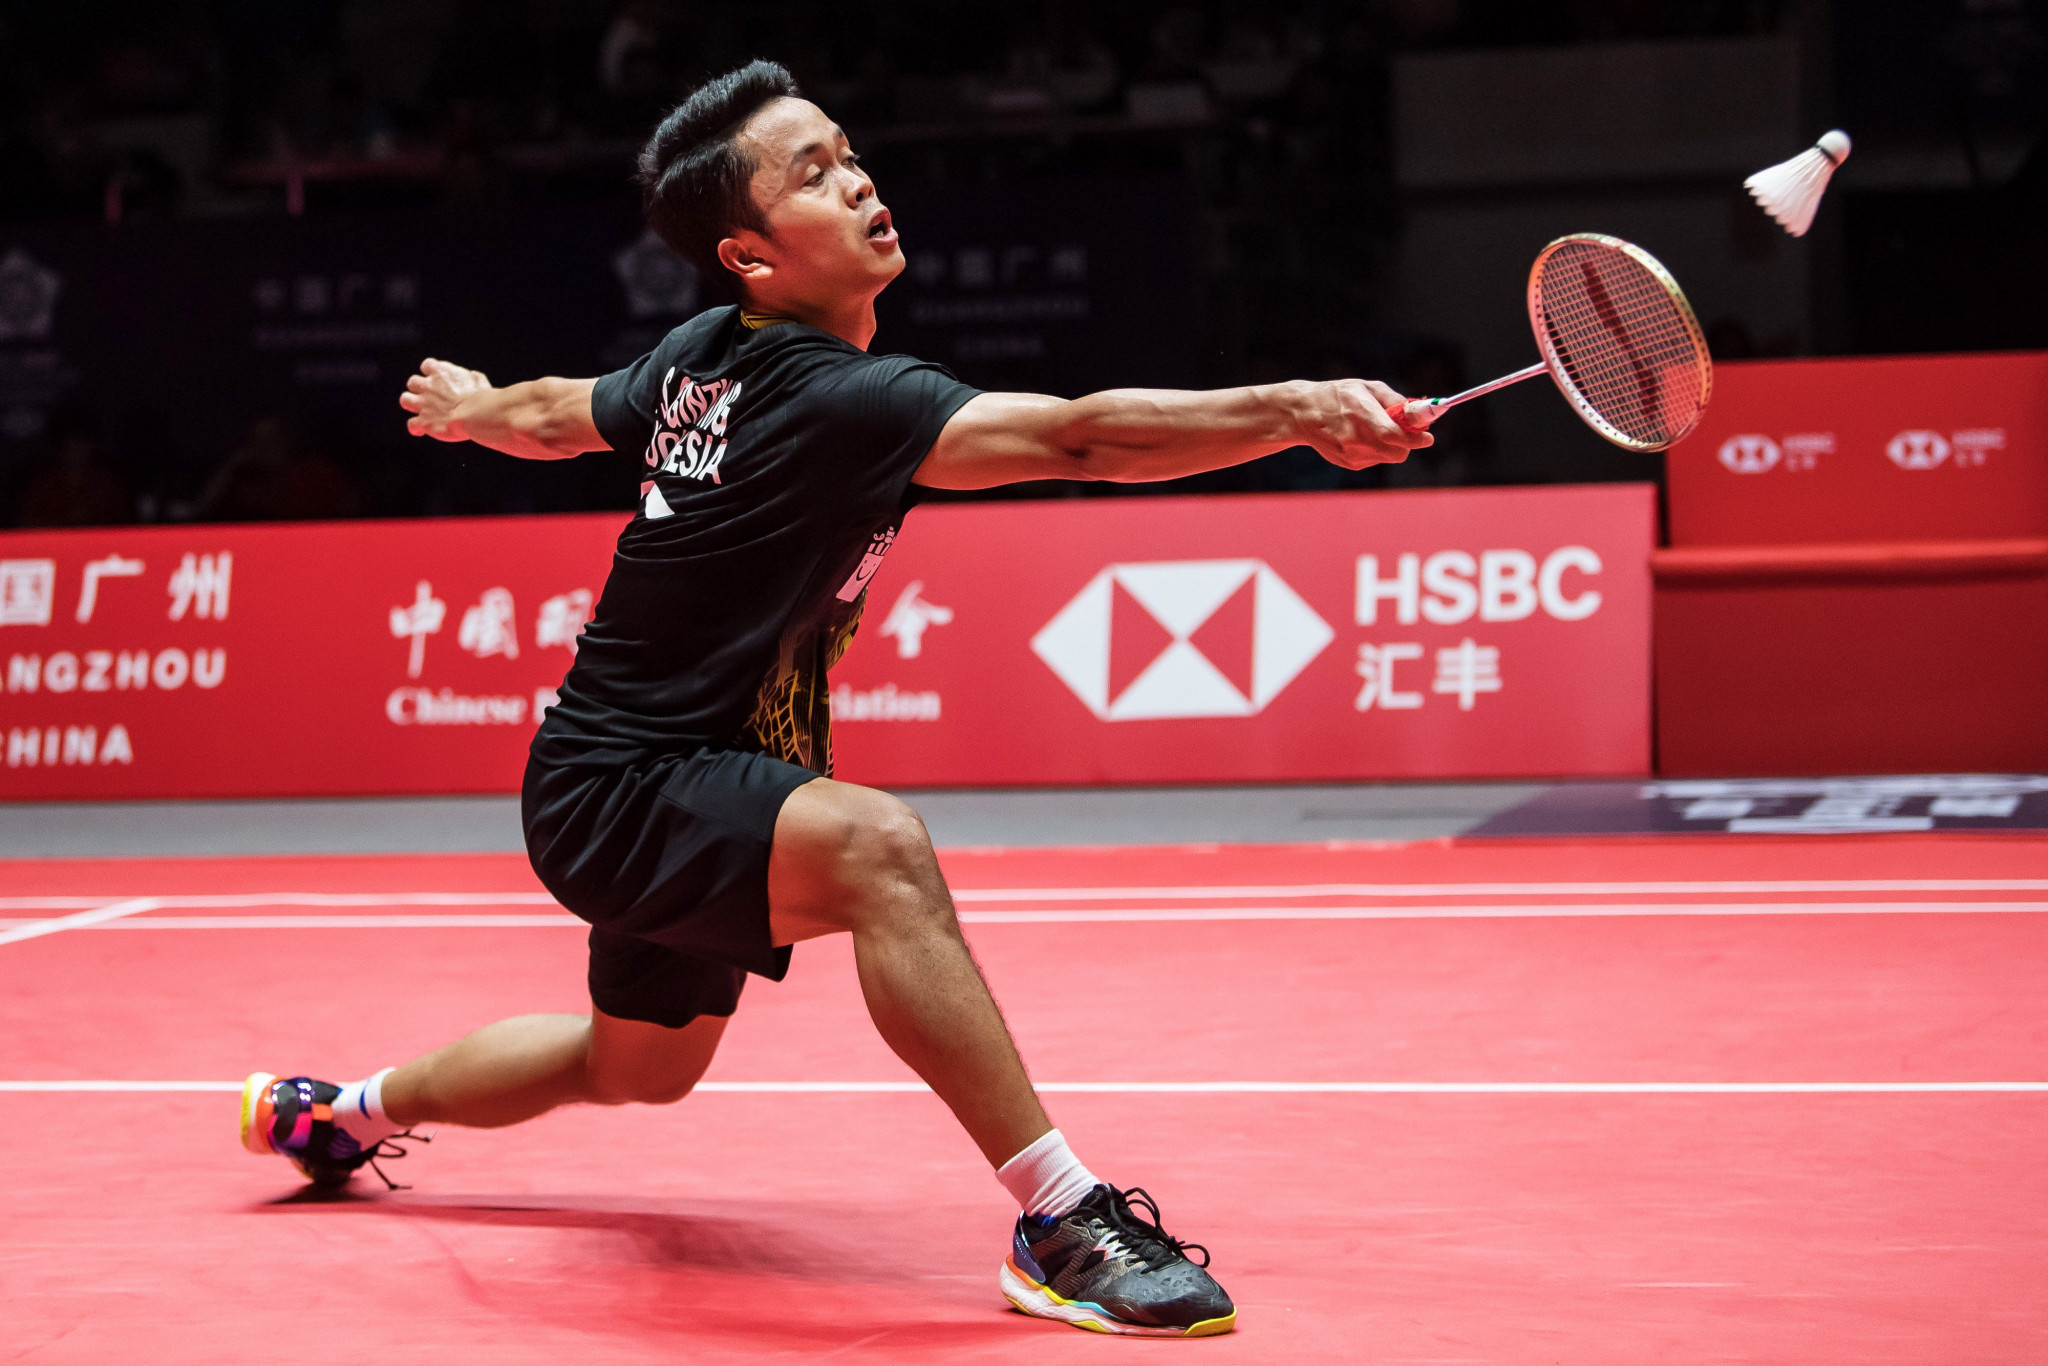 HSBC's title sponsorship of BWF World Tour extended by a year